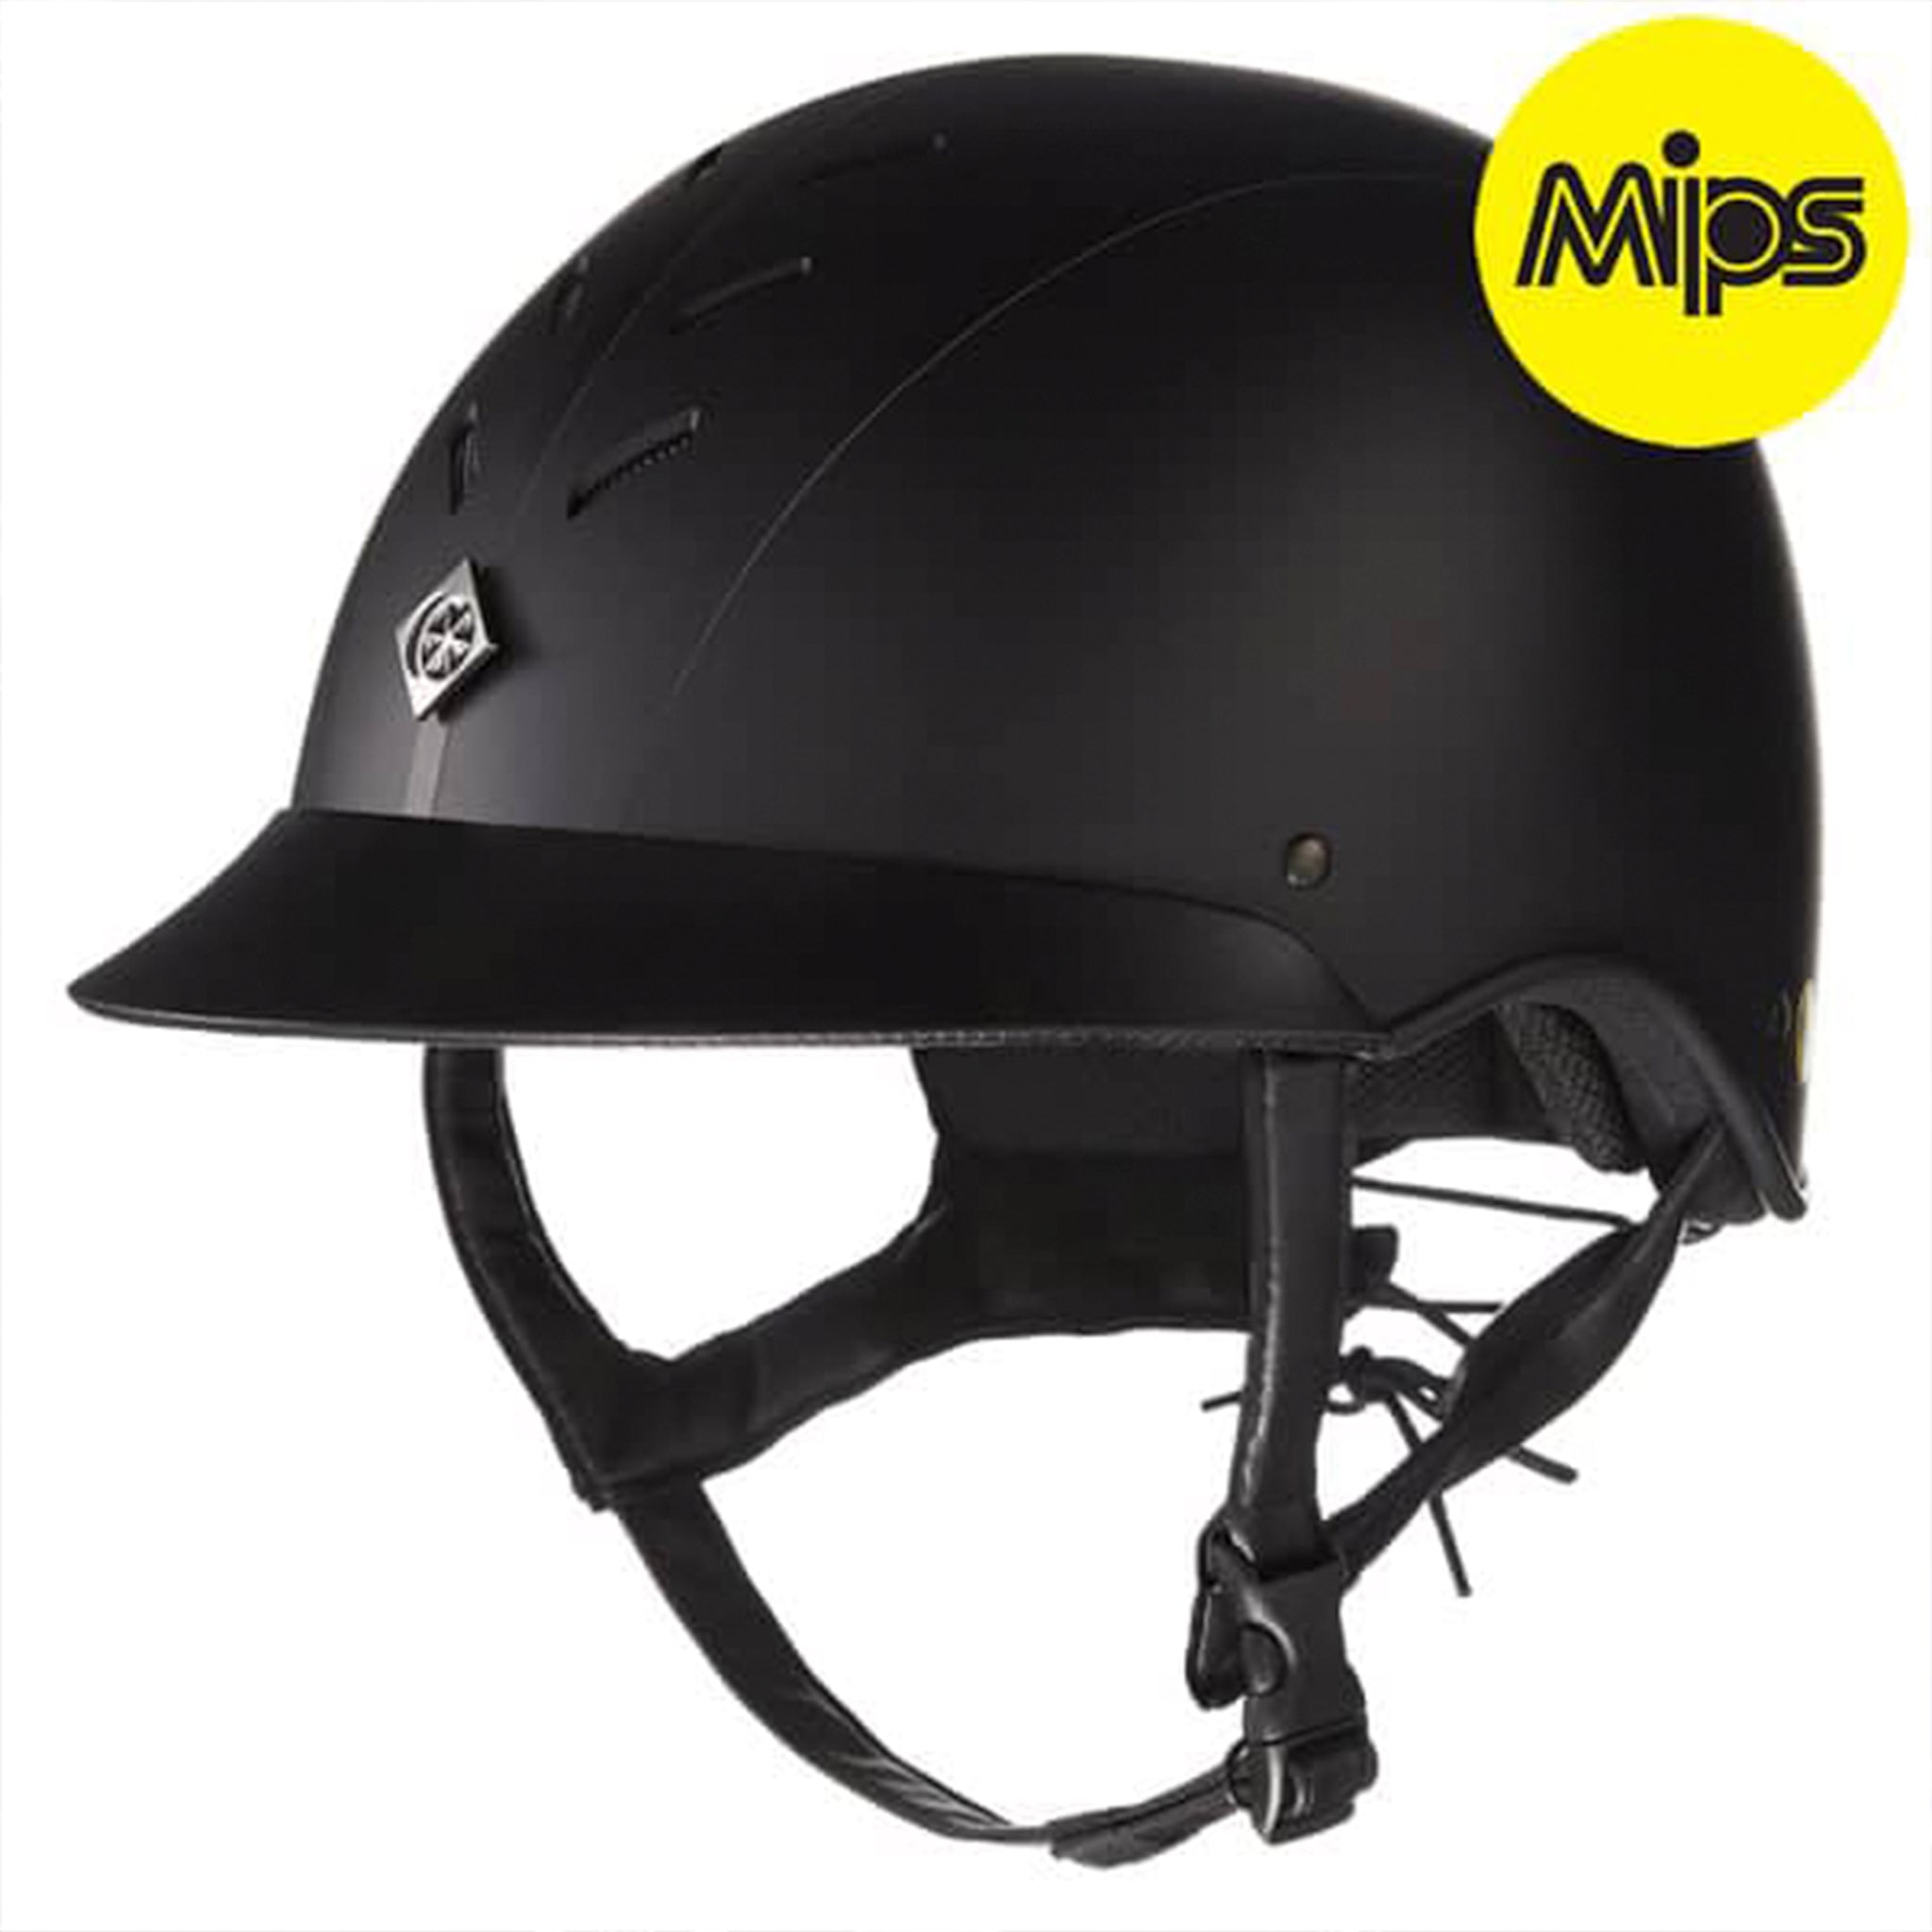 Charles Owen My PS MIPS Safety Riding Helmet